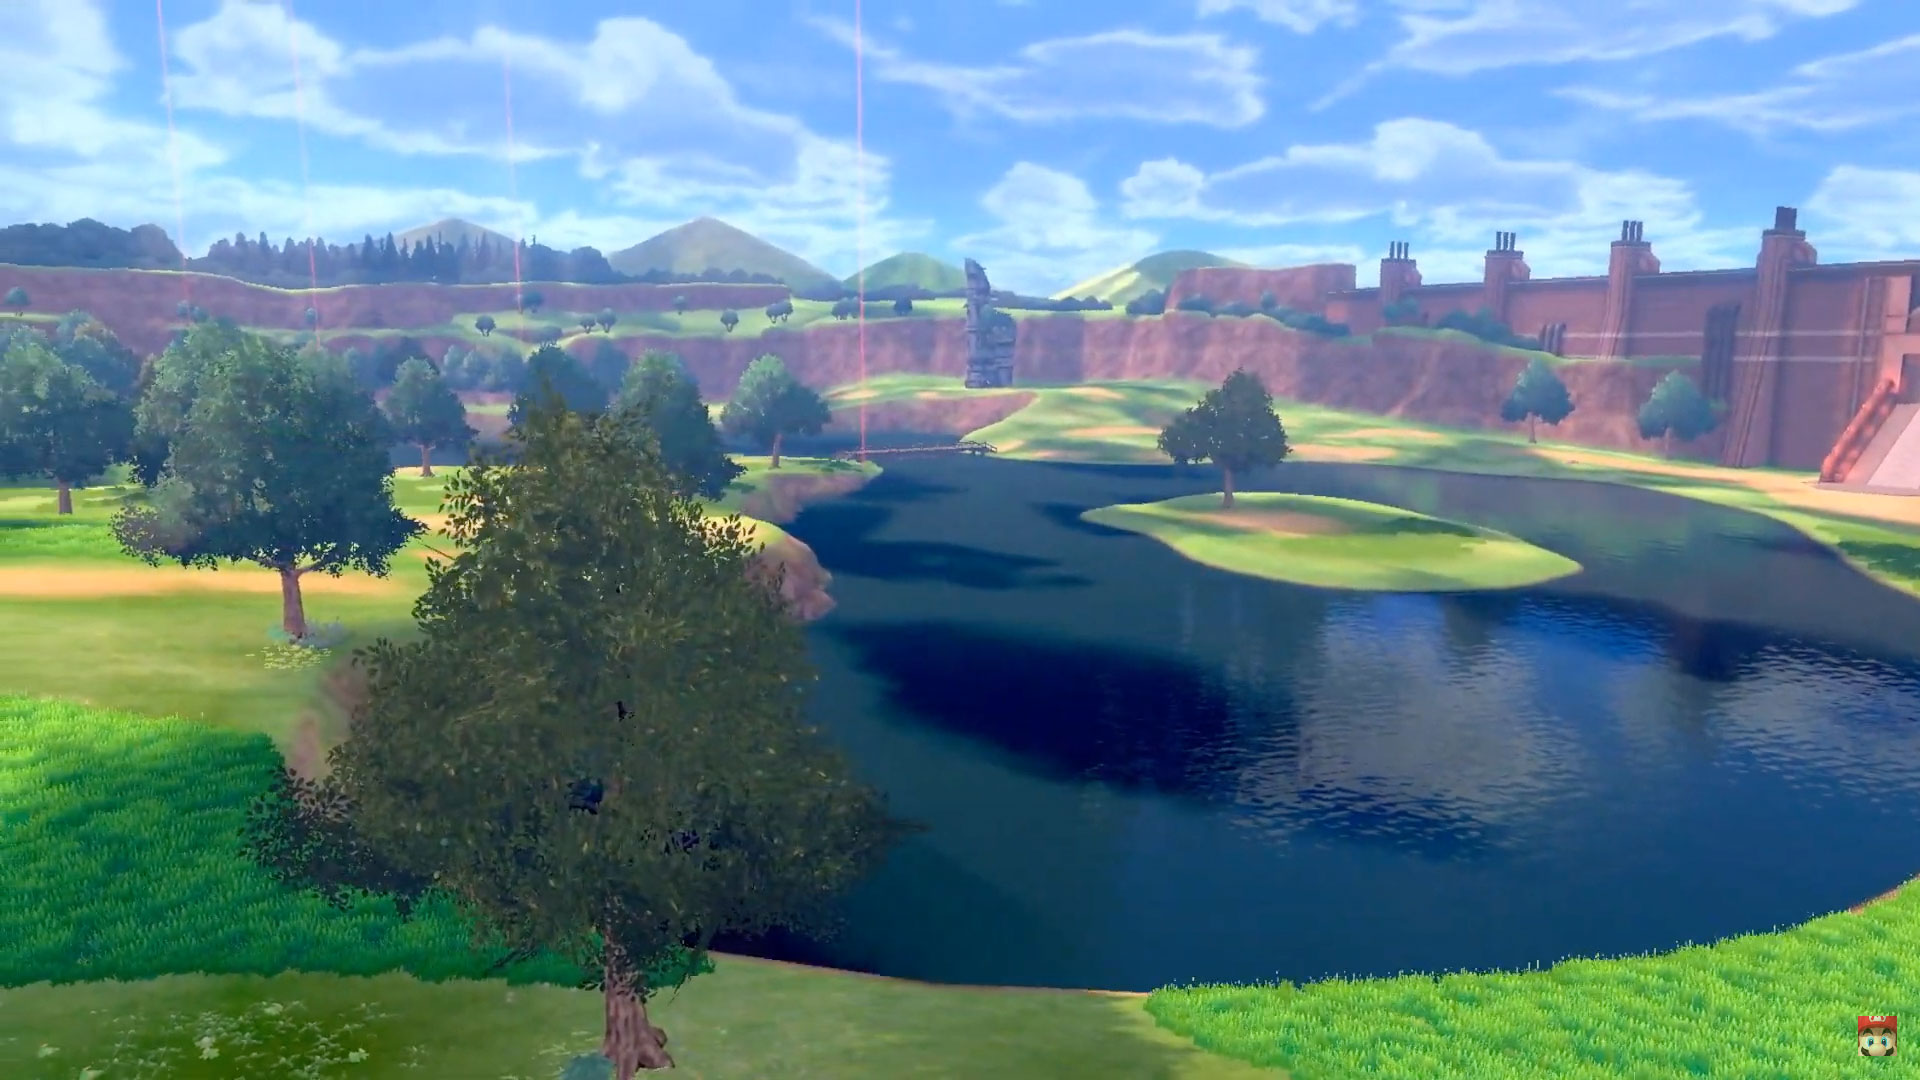 Pokemon Sword and Shield Online and Local Gameplay Explained